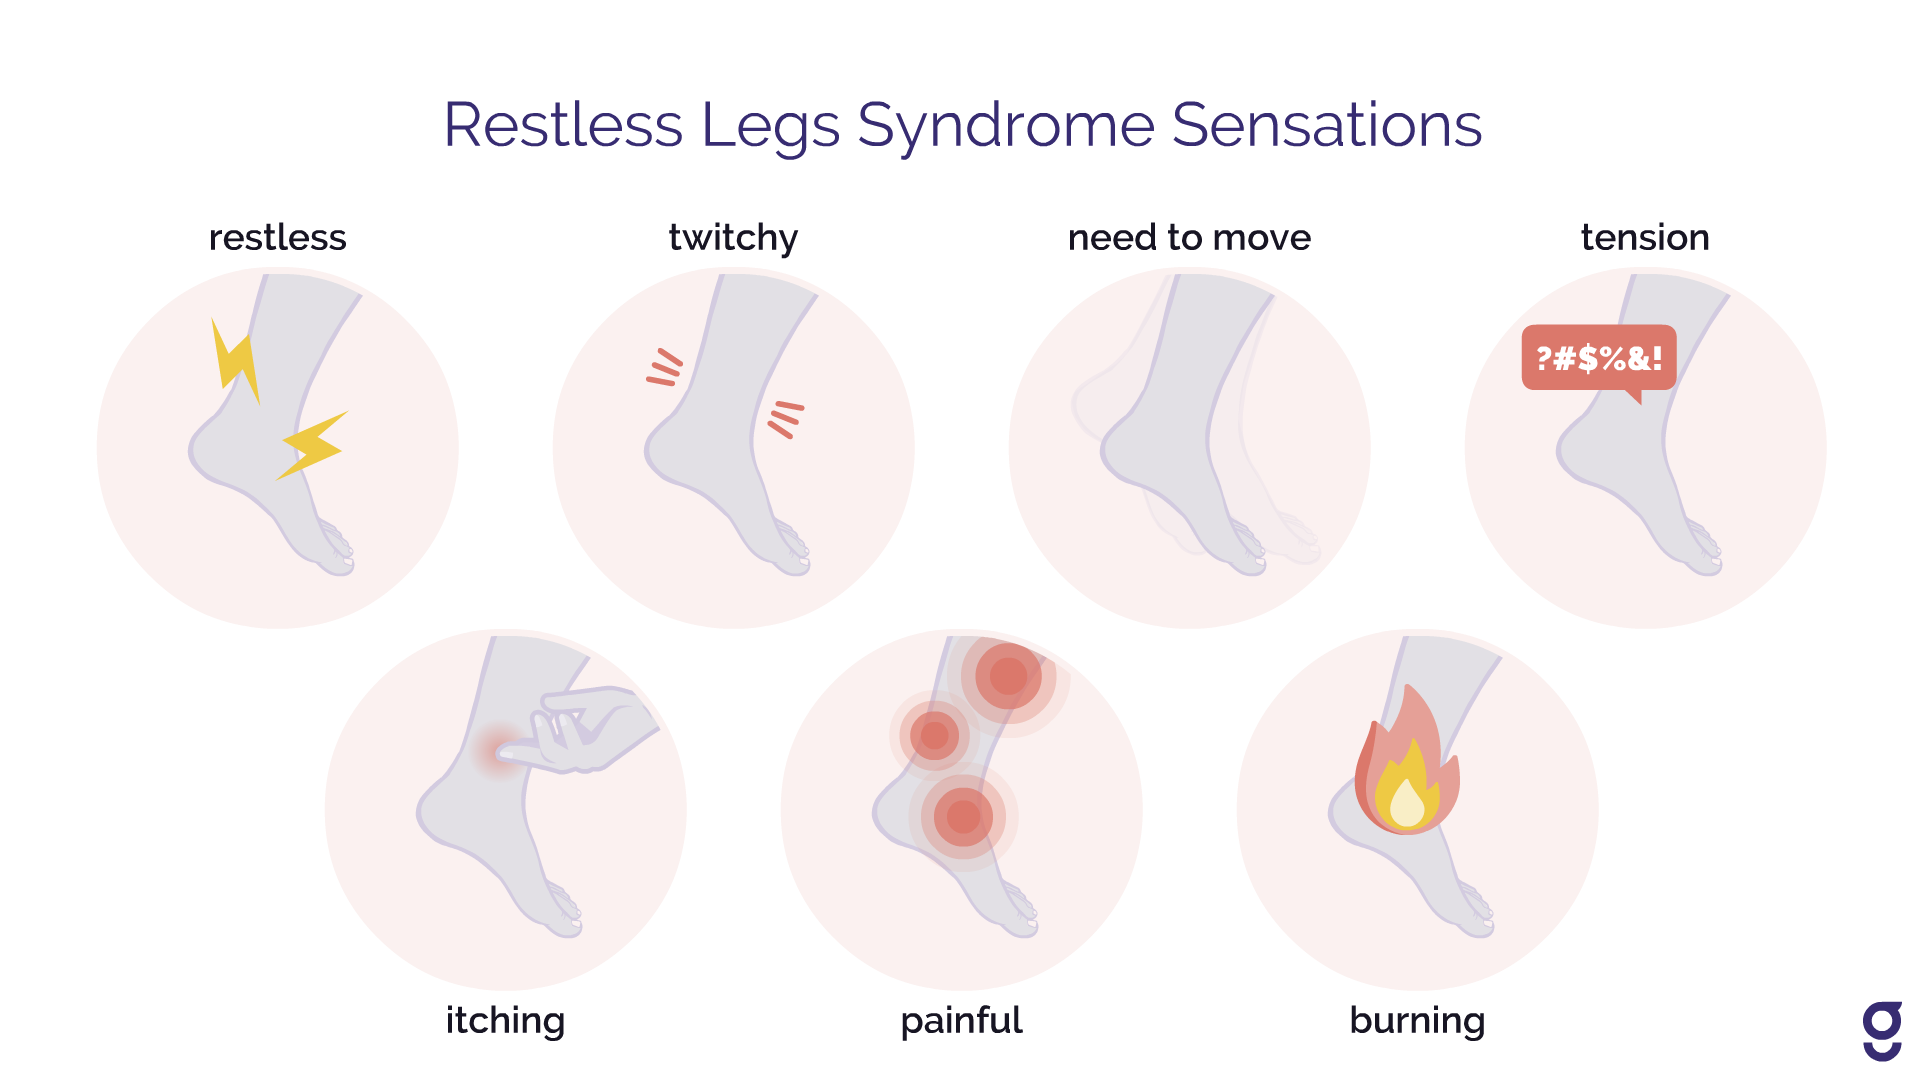 How to Relieve Restless Legs Syndrome